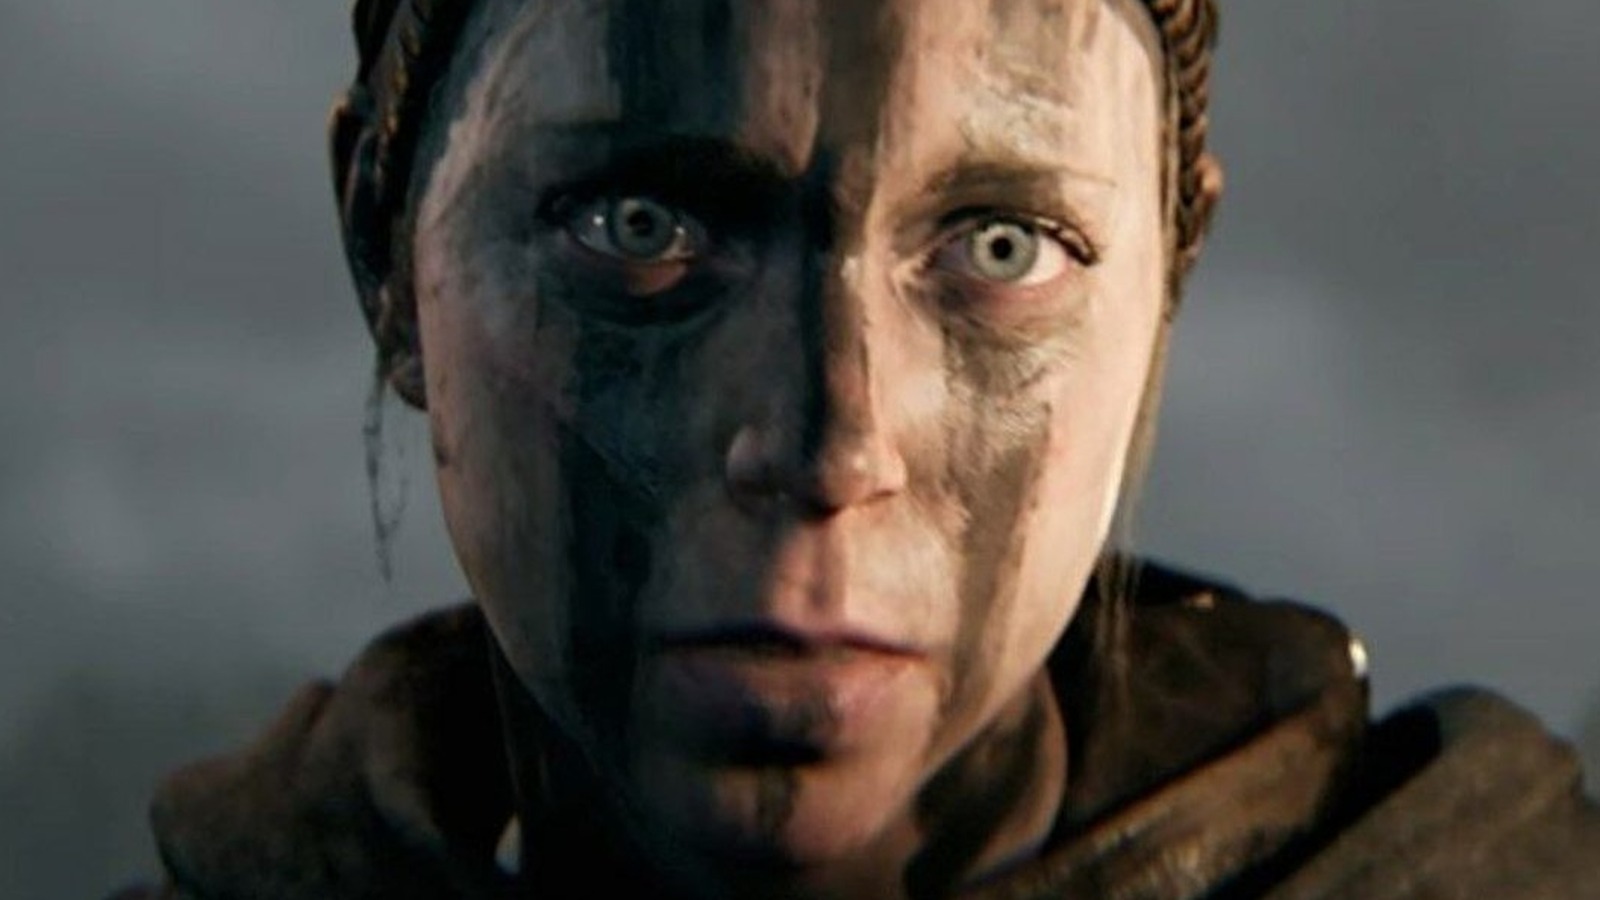 HELLBLADE 2 Official Trailer (2020) Xbox Series X 